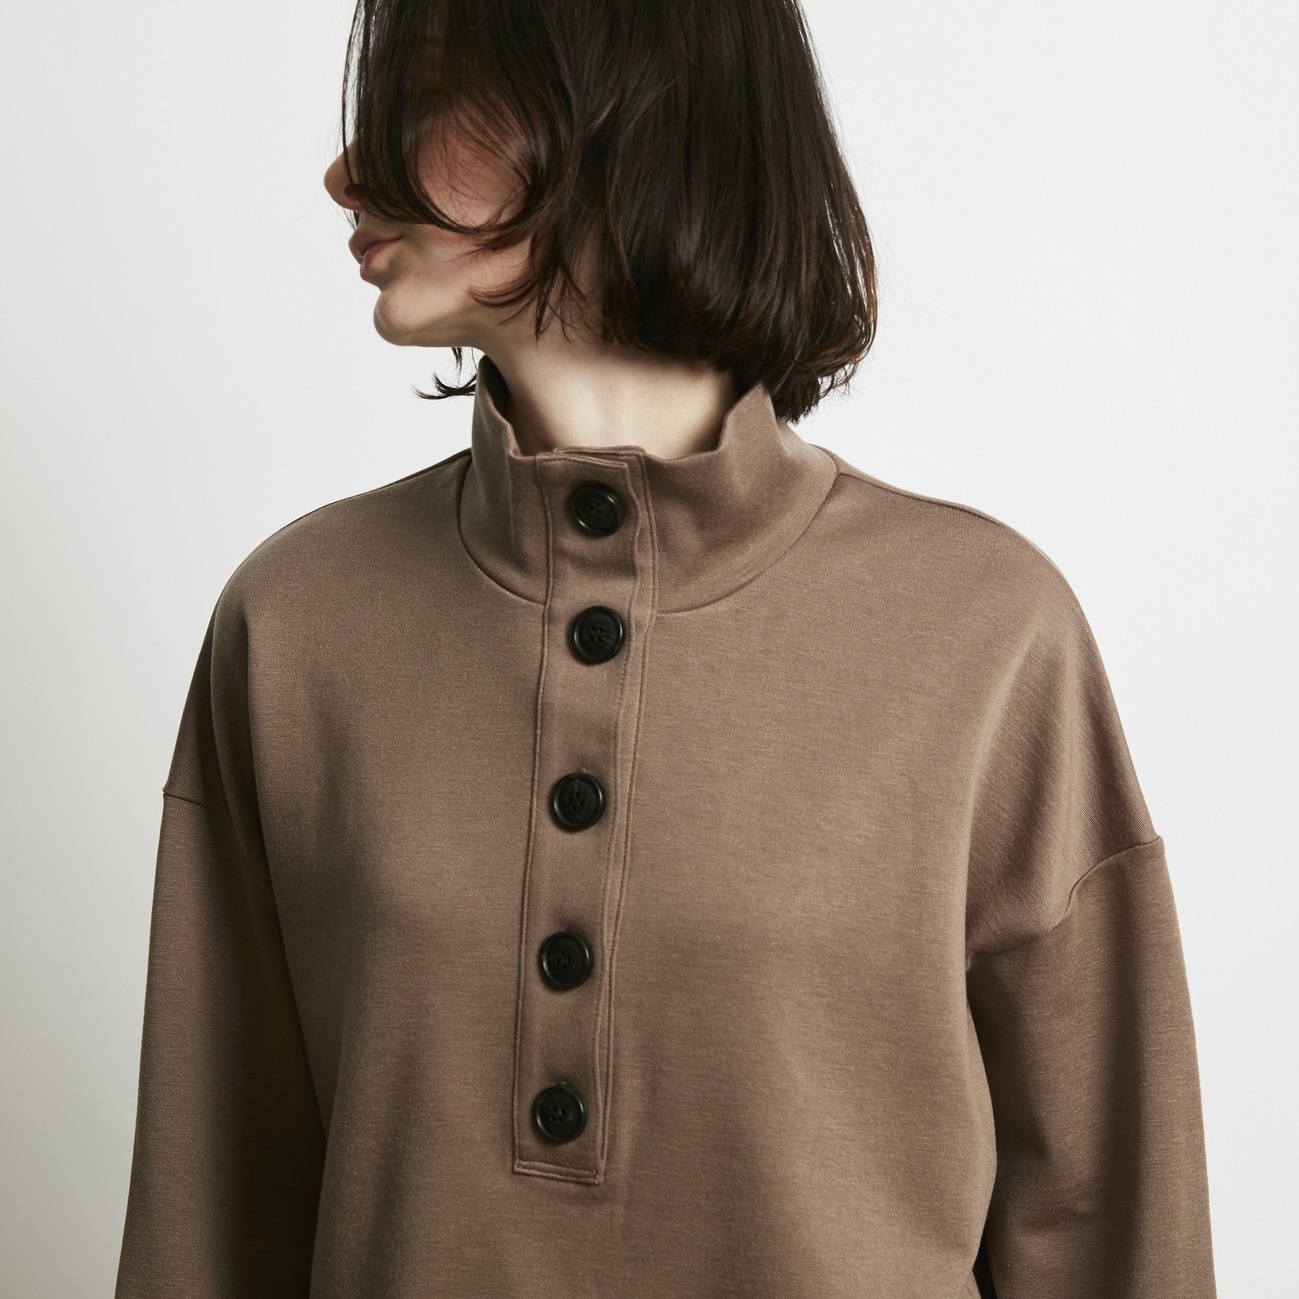 WOOL JERSEY STAND NECK PO 詳細画像 ダークブラウン 14